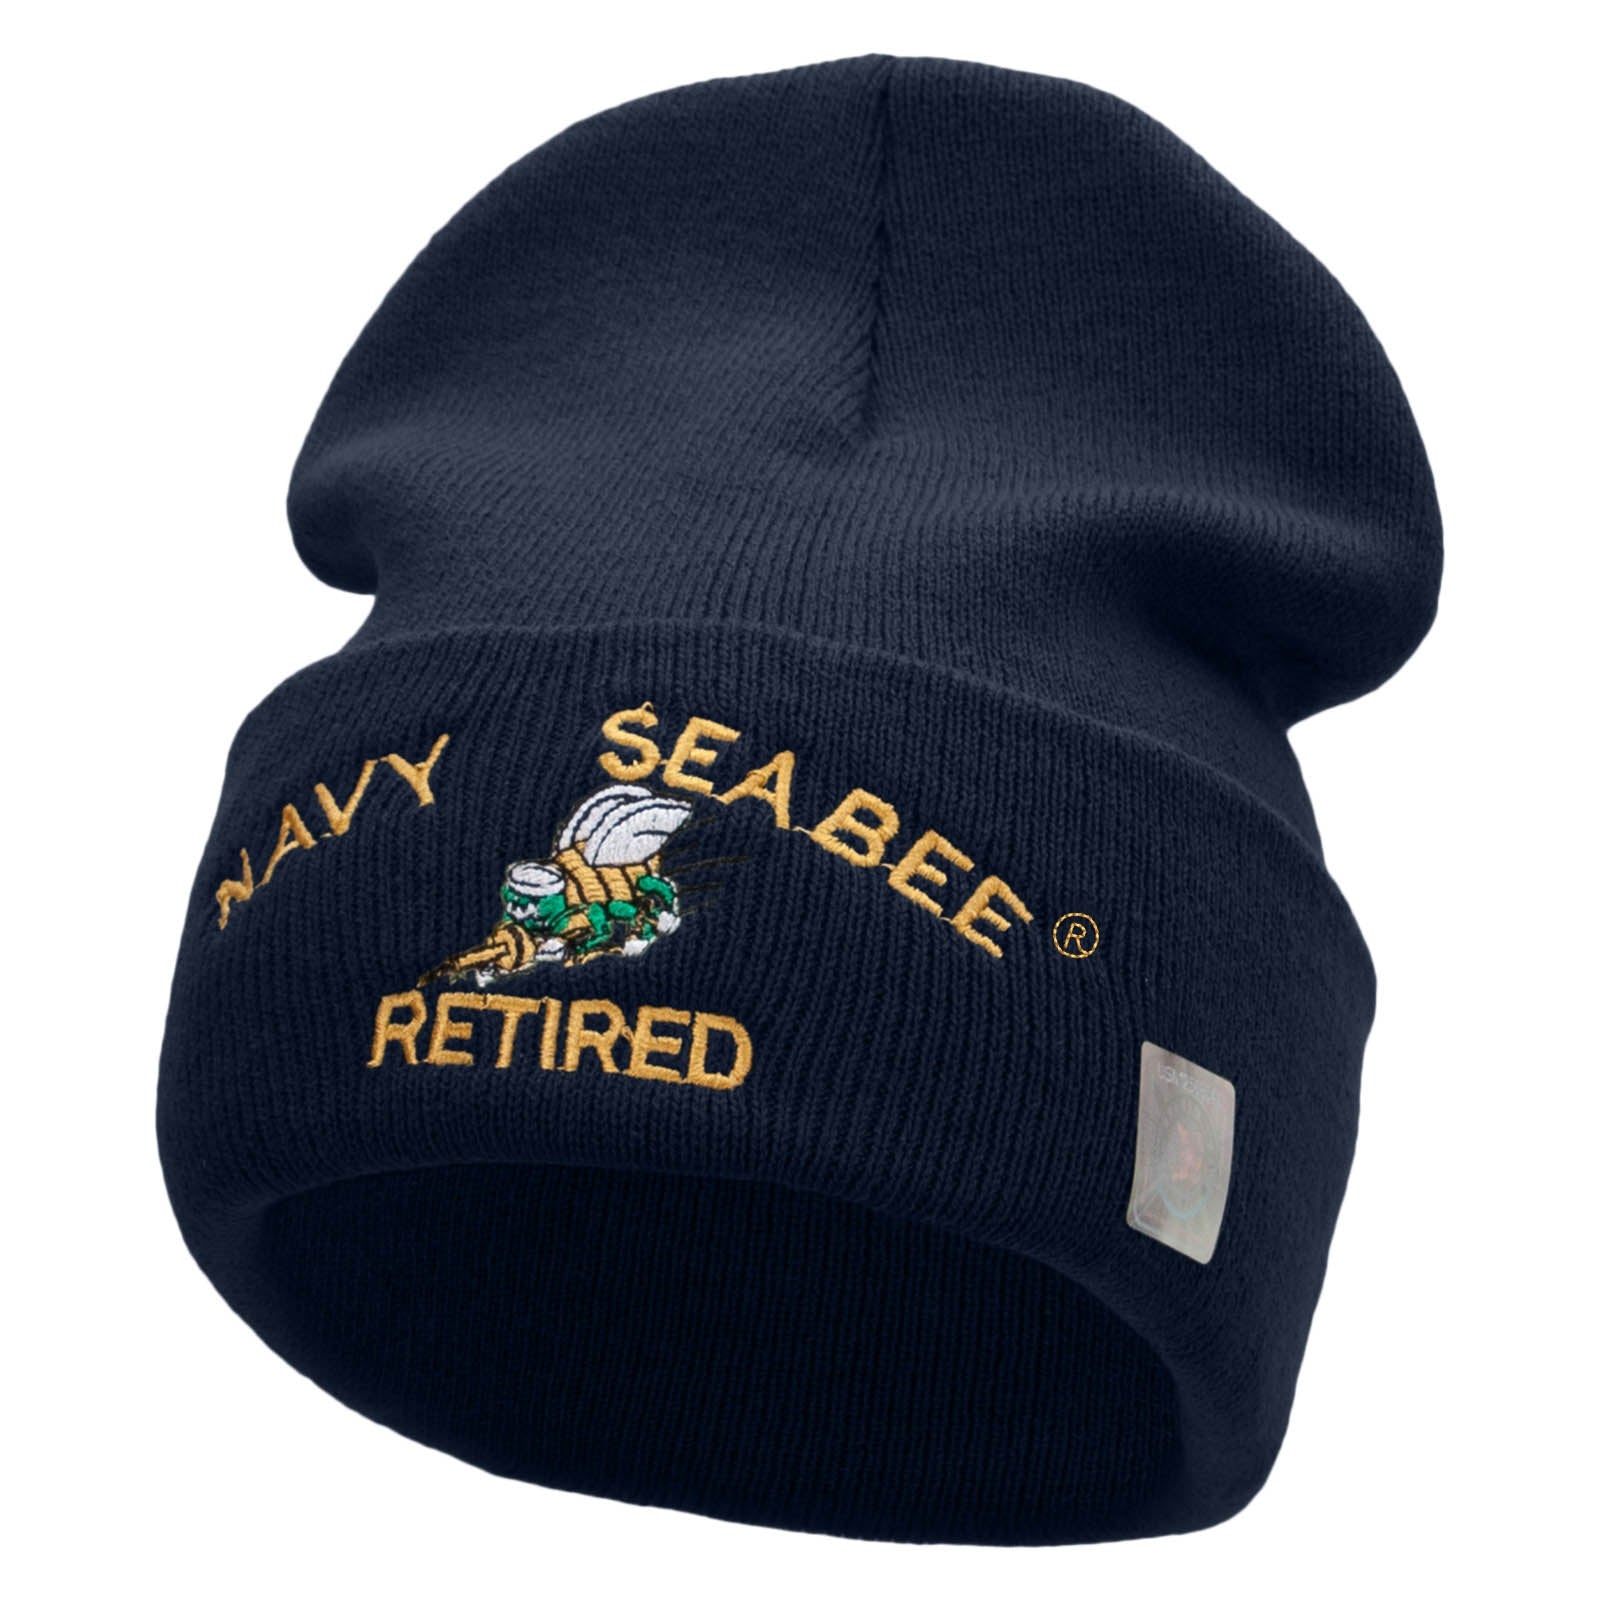 Licensed US Navy Seabee Retired Military Embroidered Long Beanie Made in USA - Navy OSFM